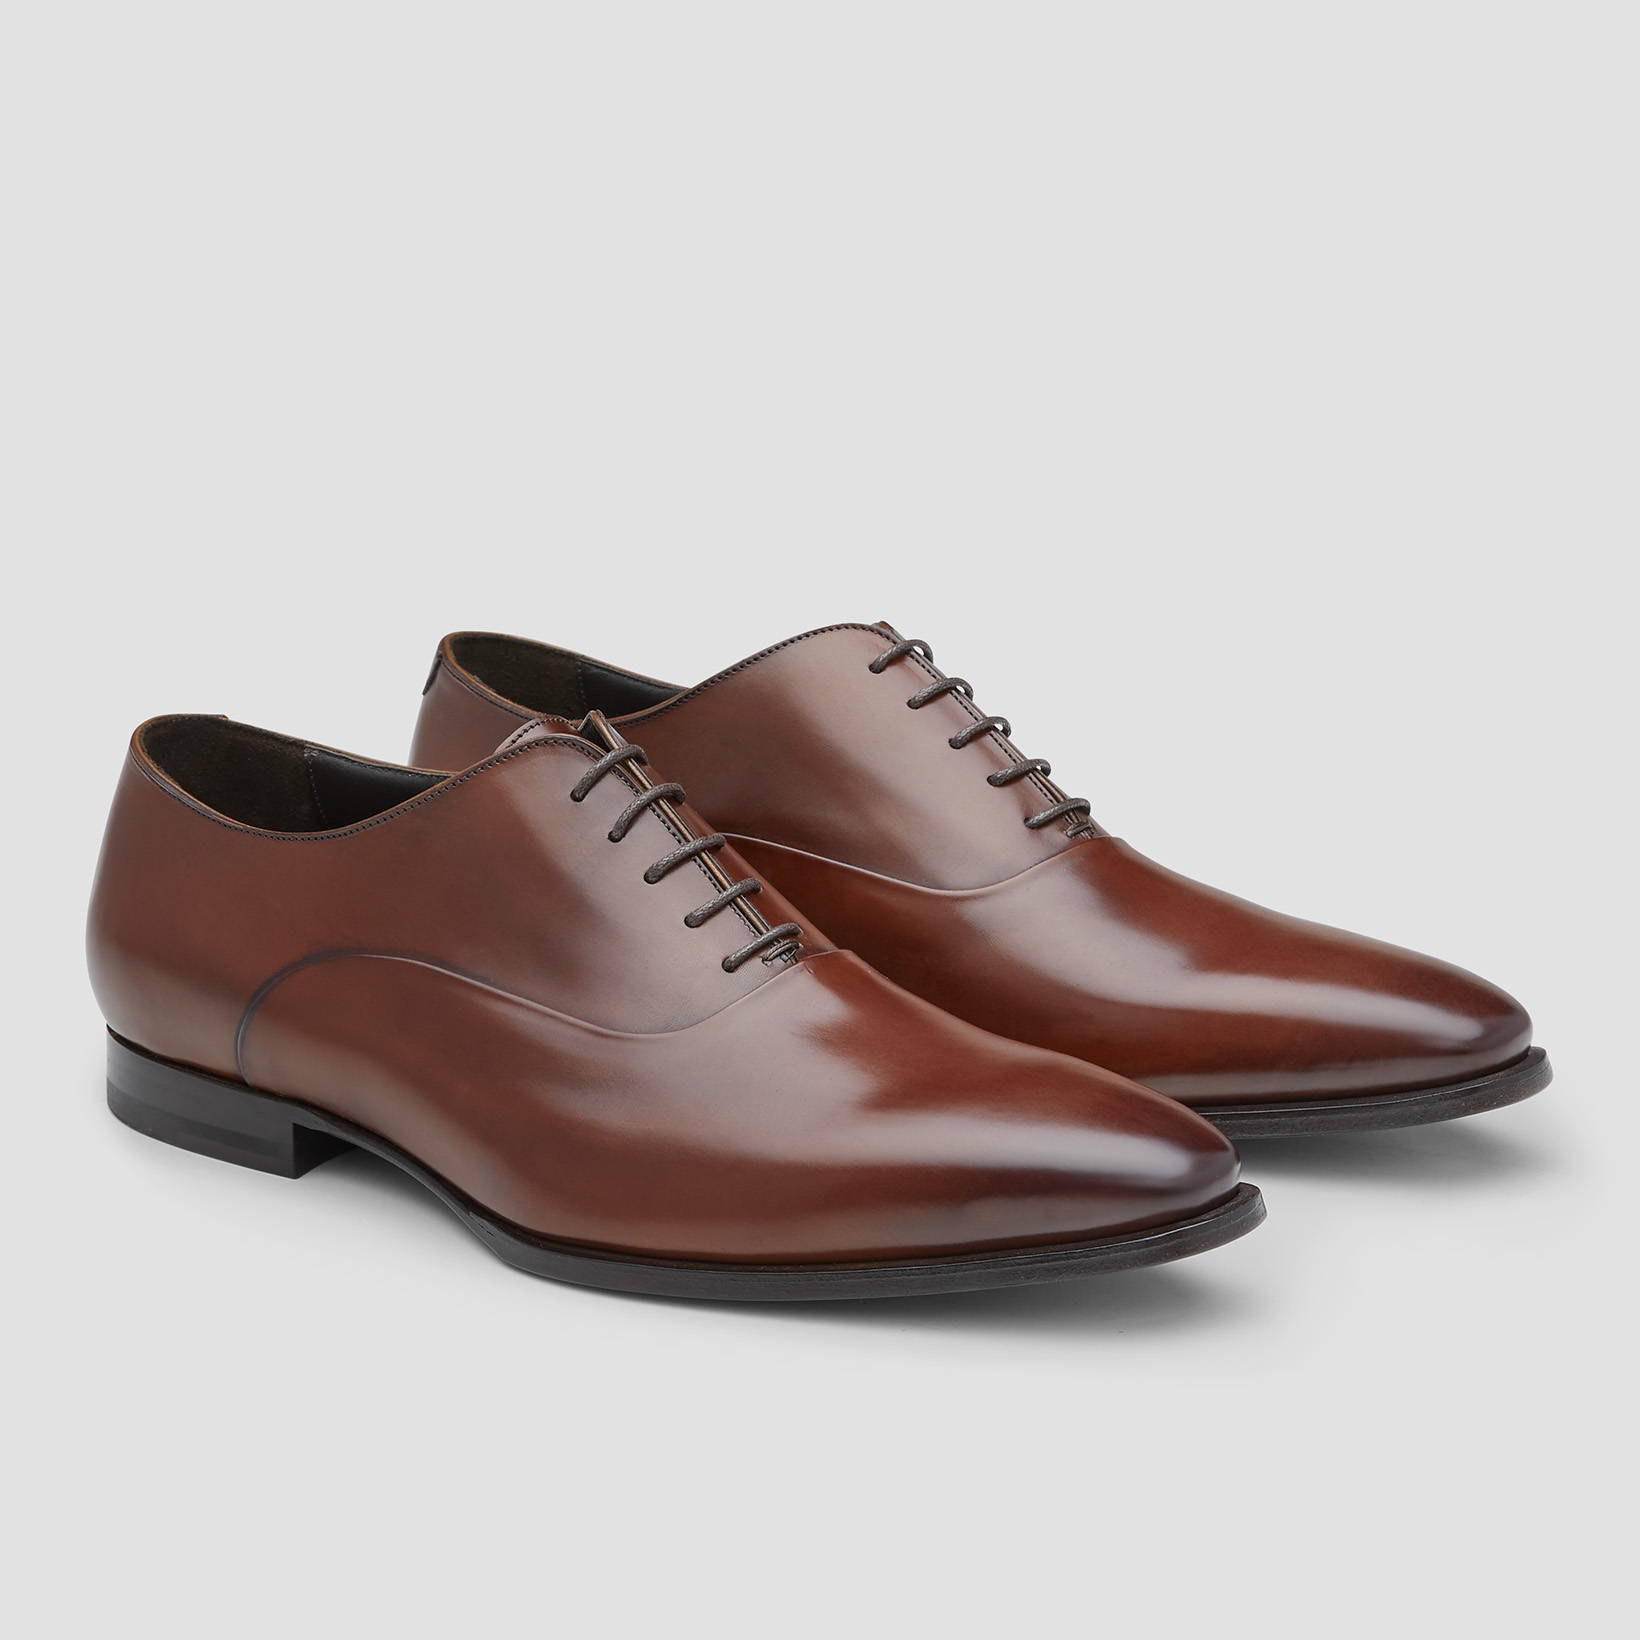 How to Wear Oxford Shoes - Aquila